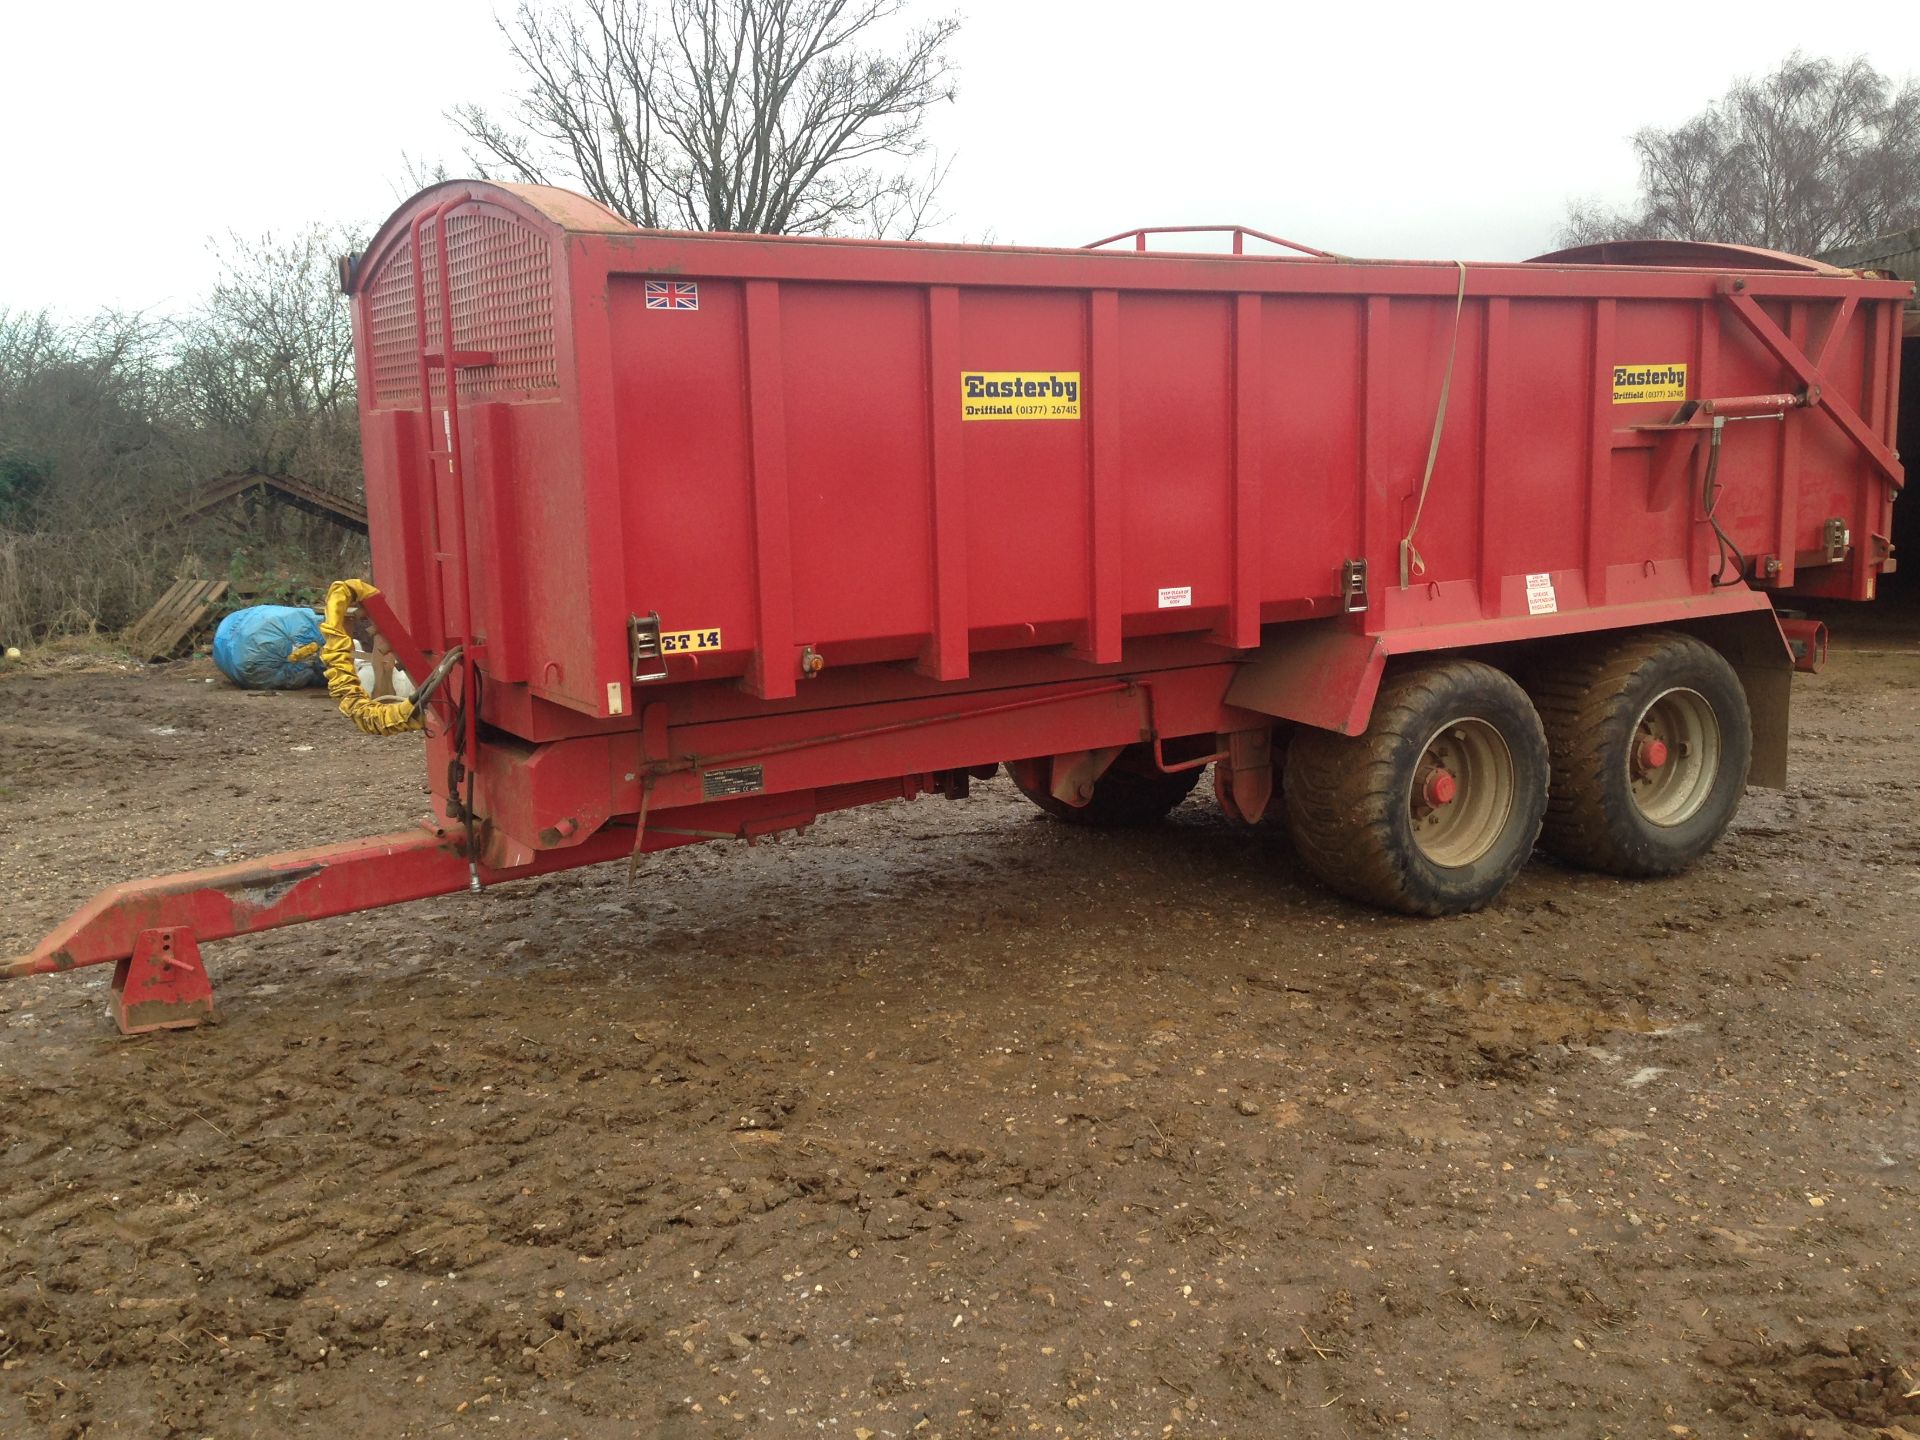 2012 Easterby ET 14 tonnes steel monocoque, sprung tandem axle tipping Trailer c/w sprung drawbar, - Image 3 of 3